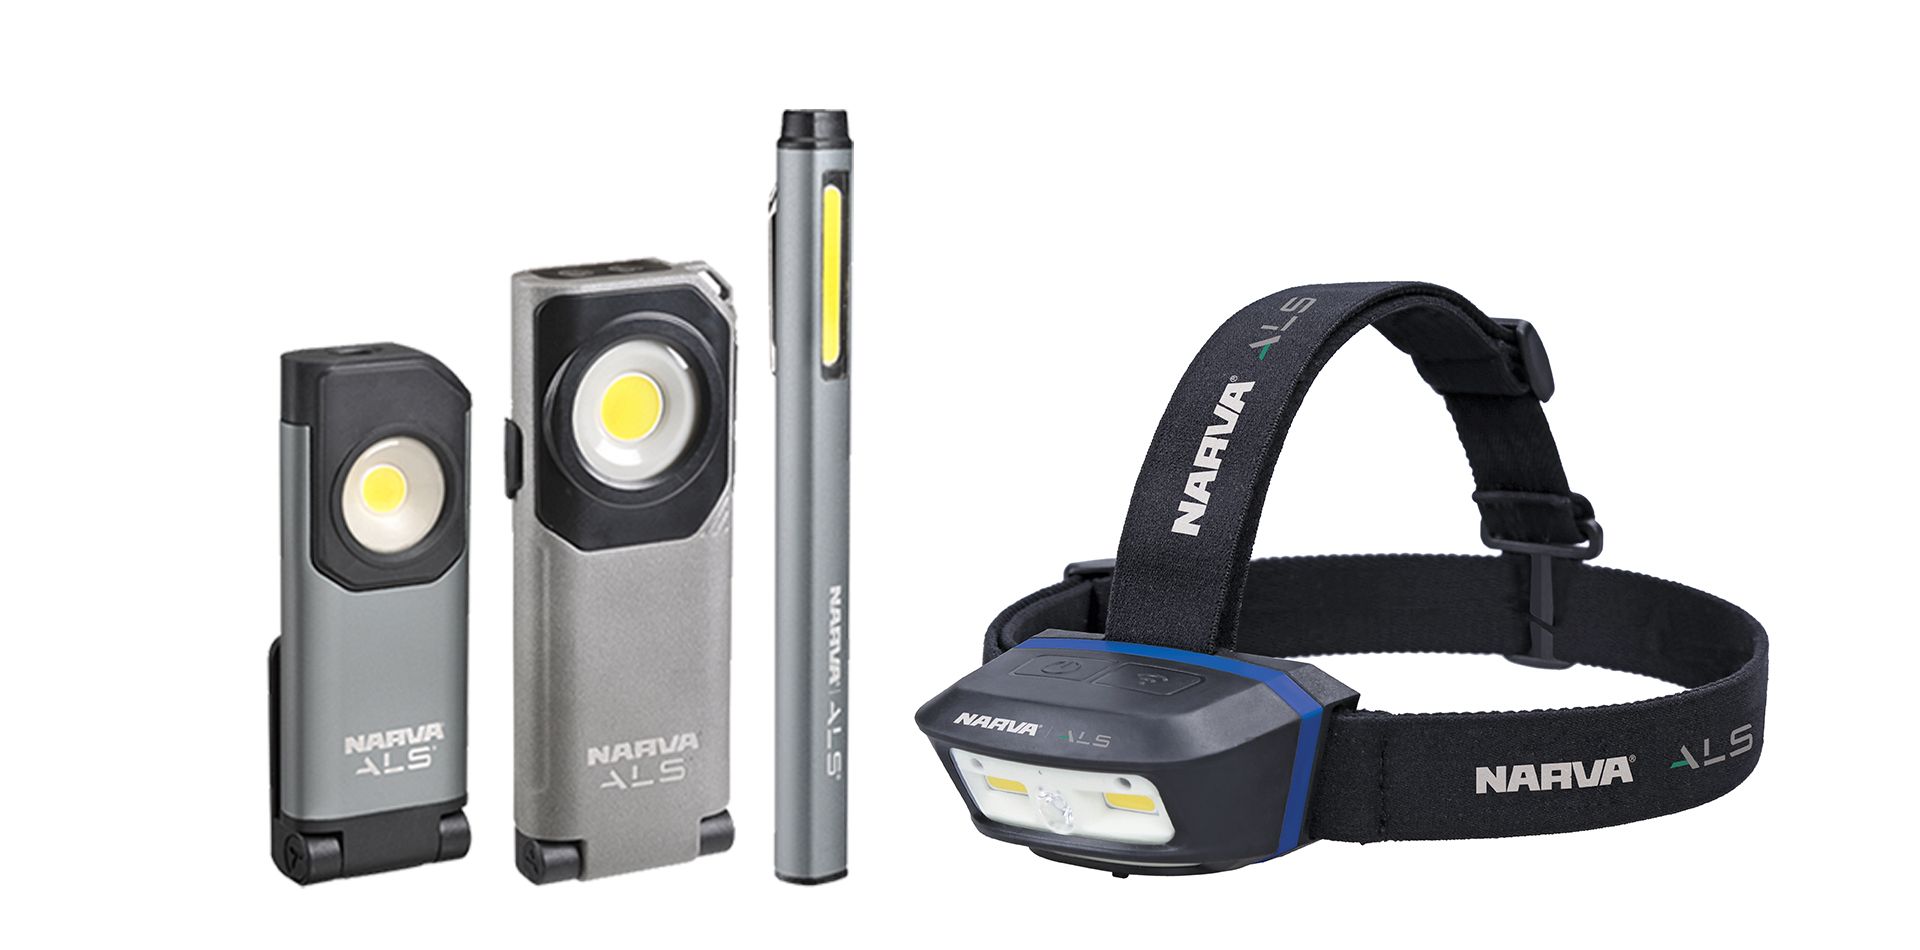 Narva ALS utility lights and head torch